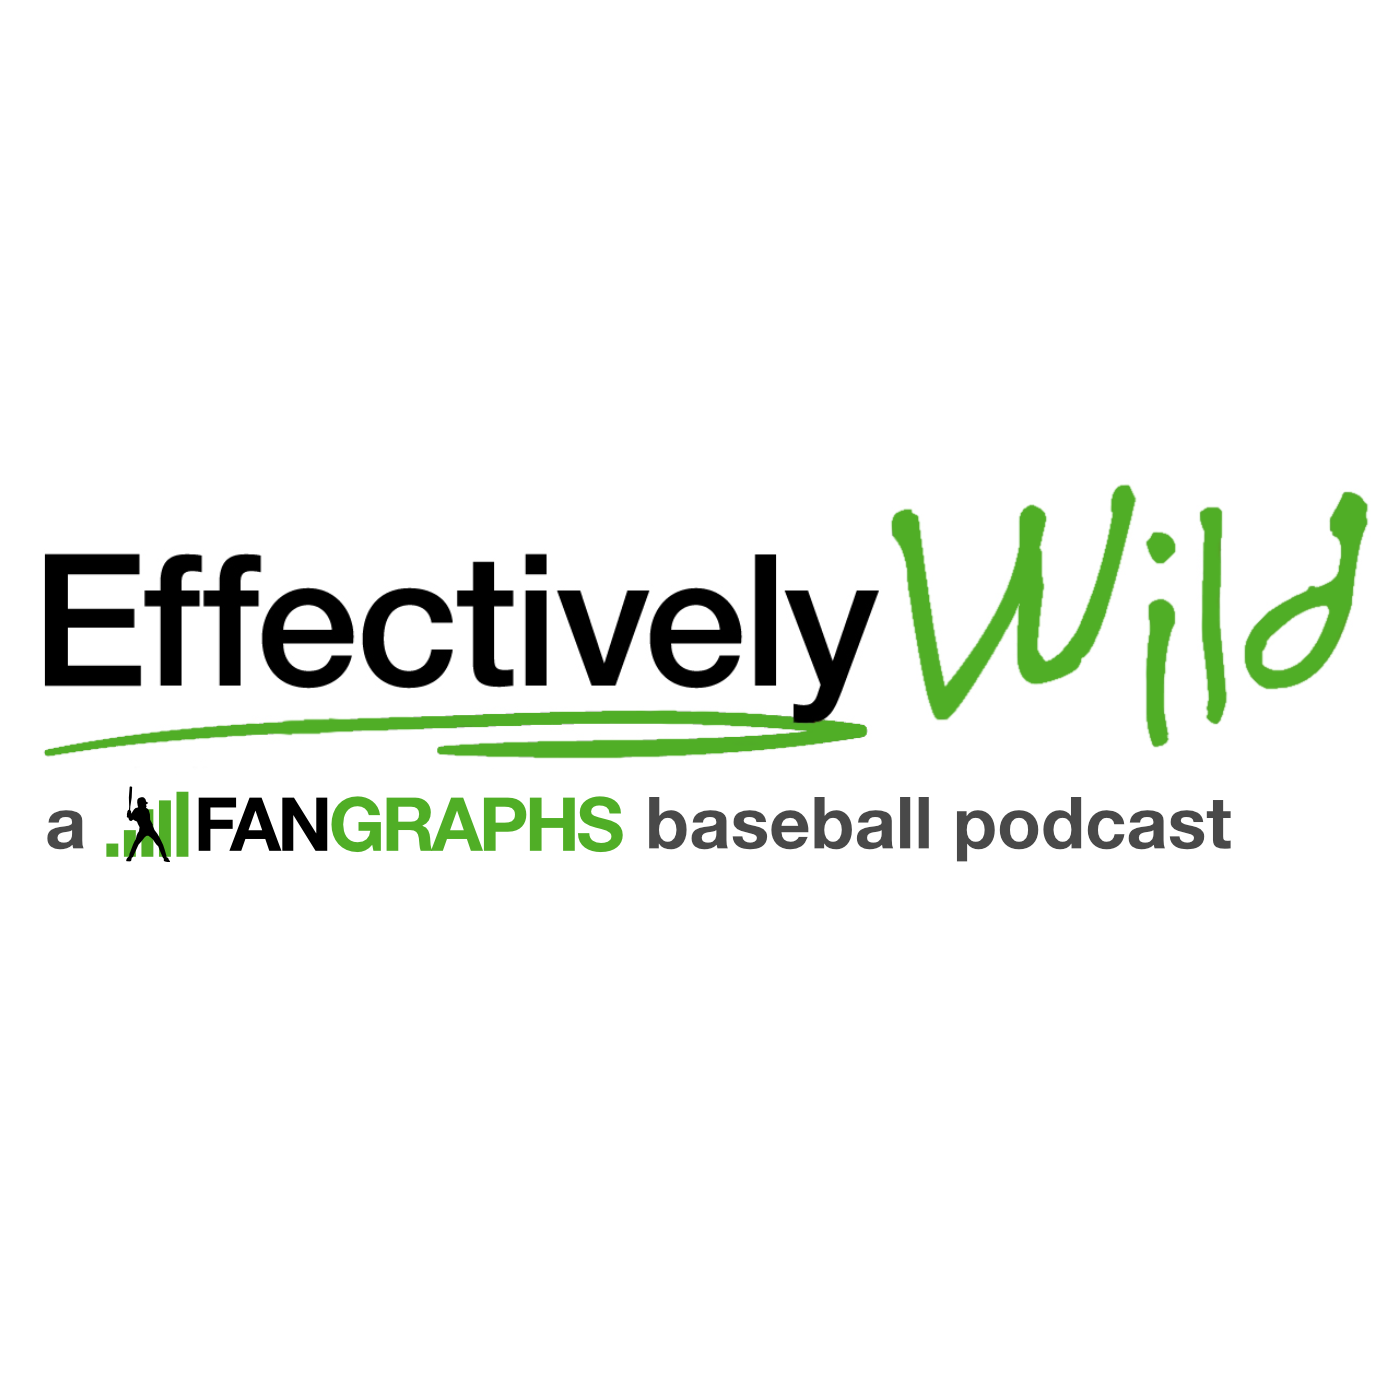 A highlight from Effectively Wild Episode 1883: Know Your Value